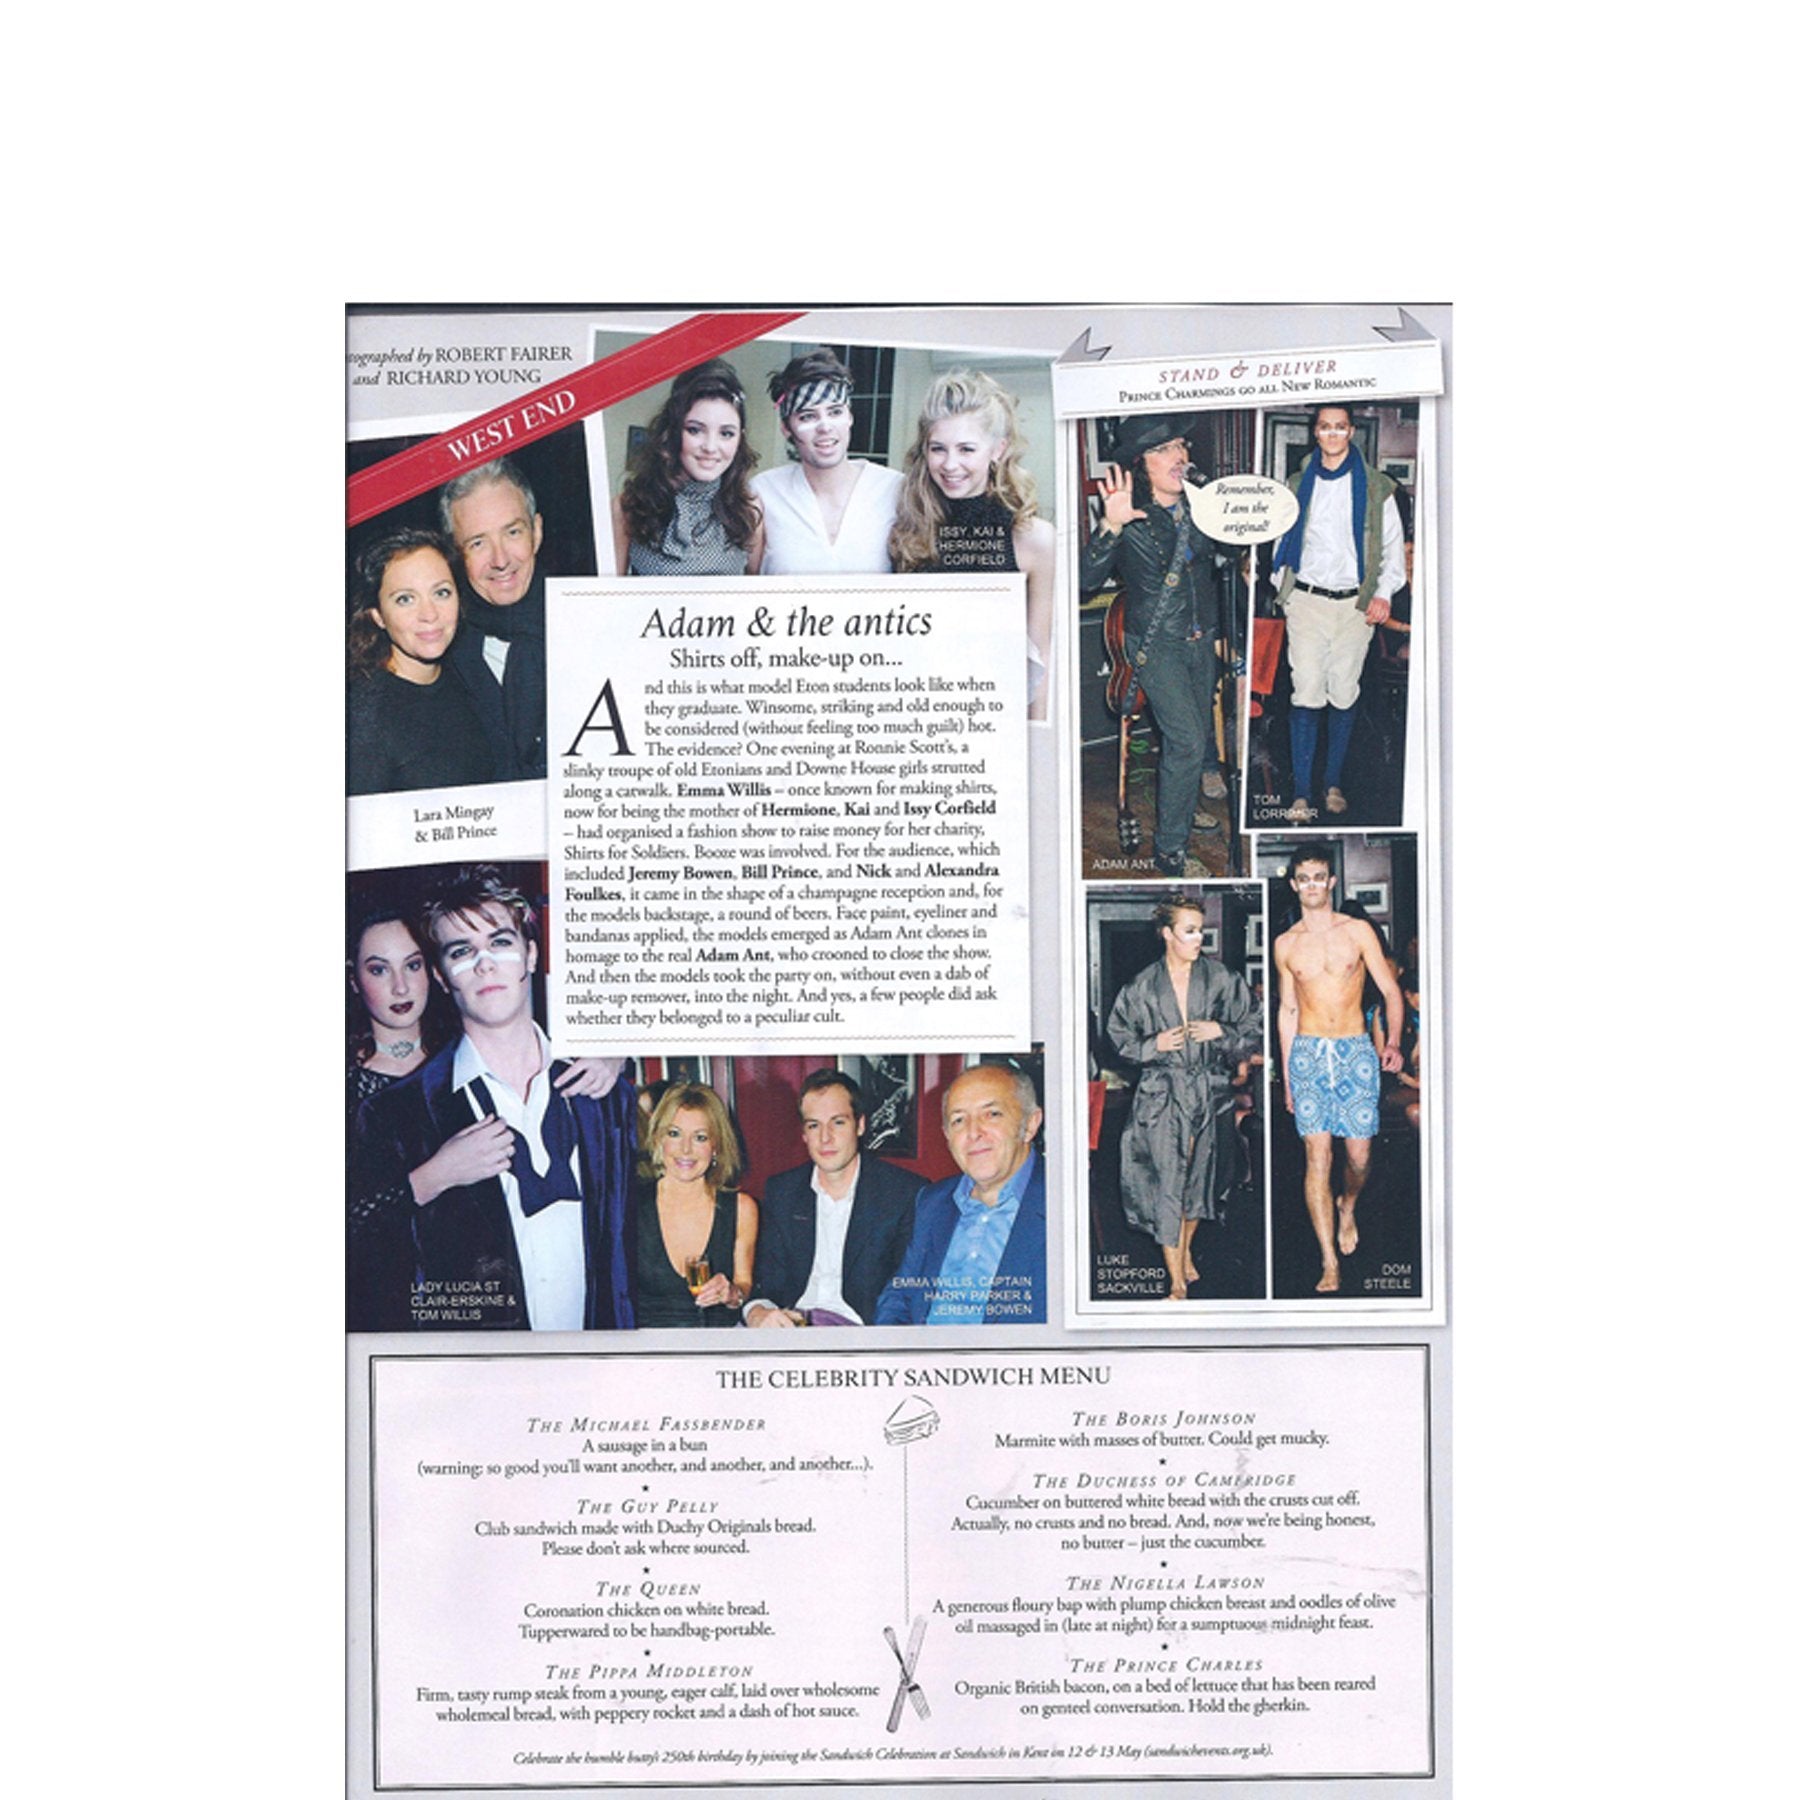 Tatler’s May edition features Emma Willis Launch Party for Sticks for Soldiers at Ronnie Scott’s with guest performer Adam Ant. - Emma Willis